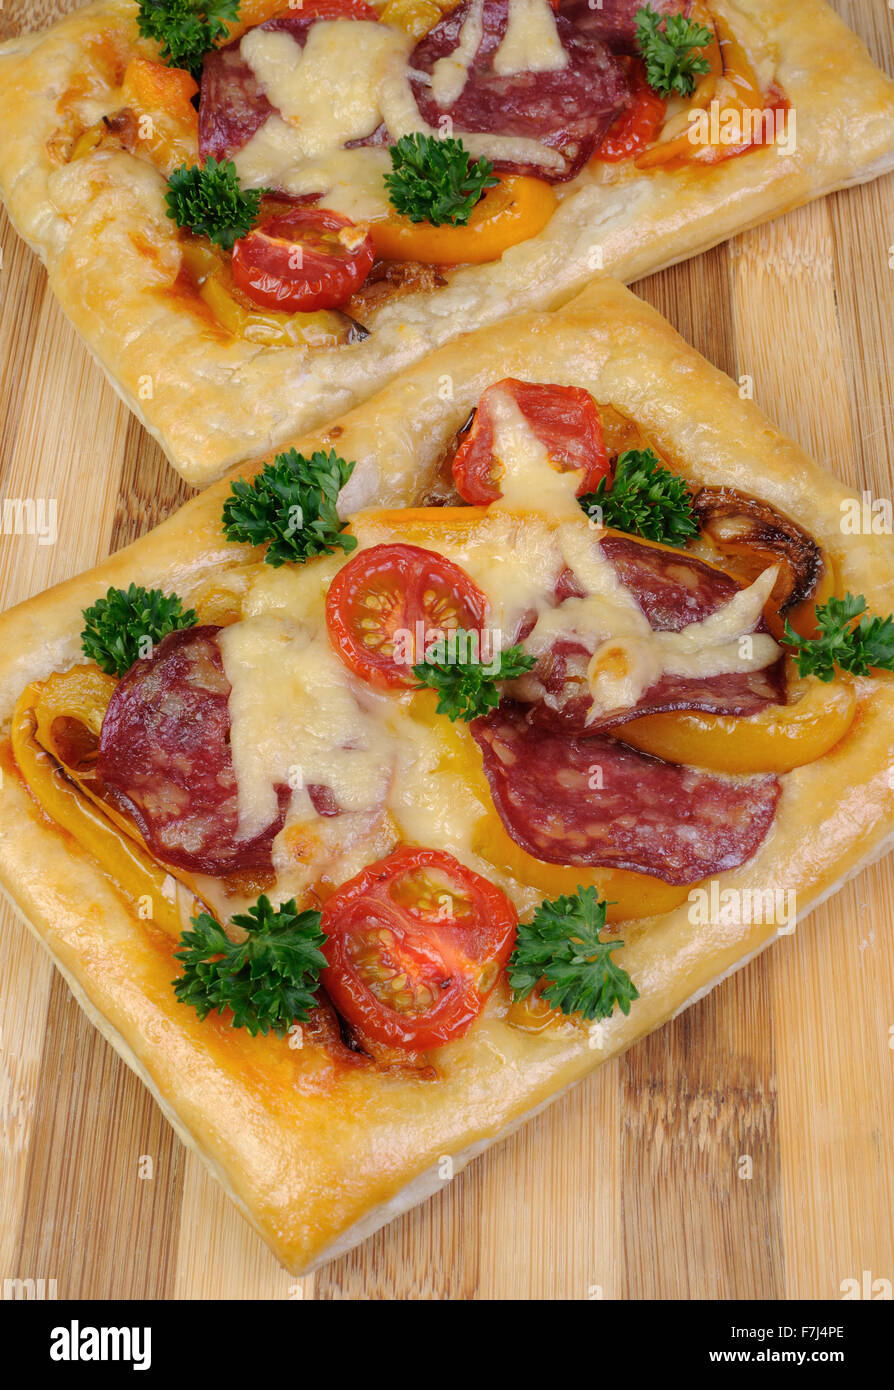 Mini pizza with vegetables, salami and cheese Stock Photo